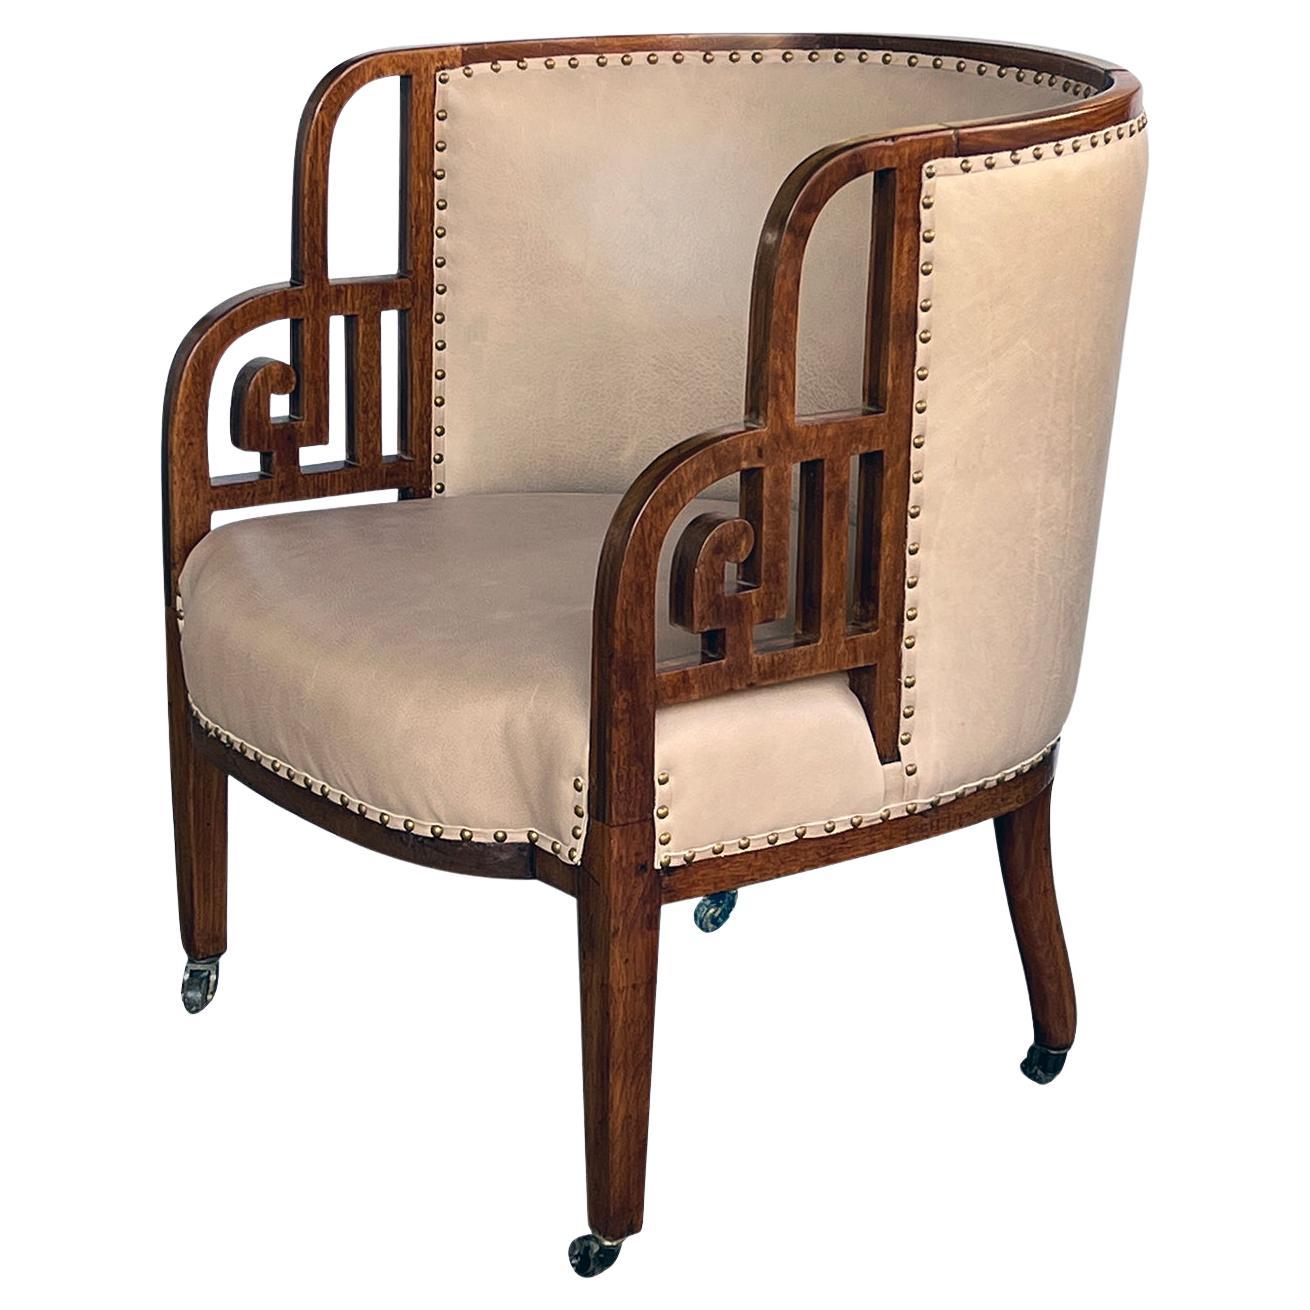 Rare English Art Deco Barrel-Back Chair in the Asian Taste For Sale